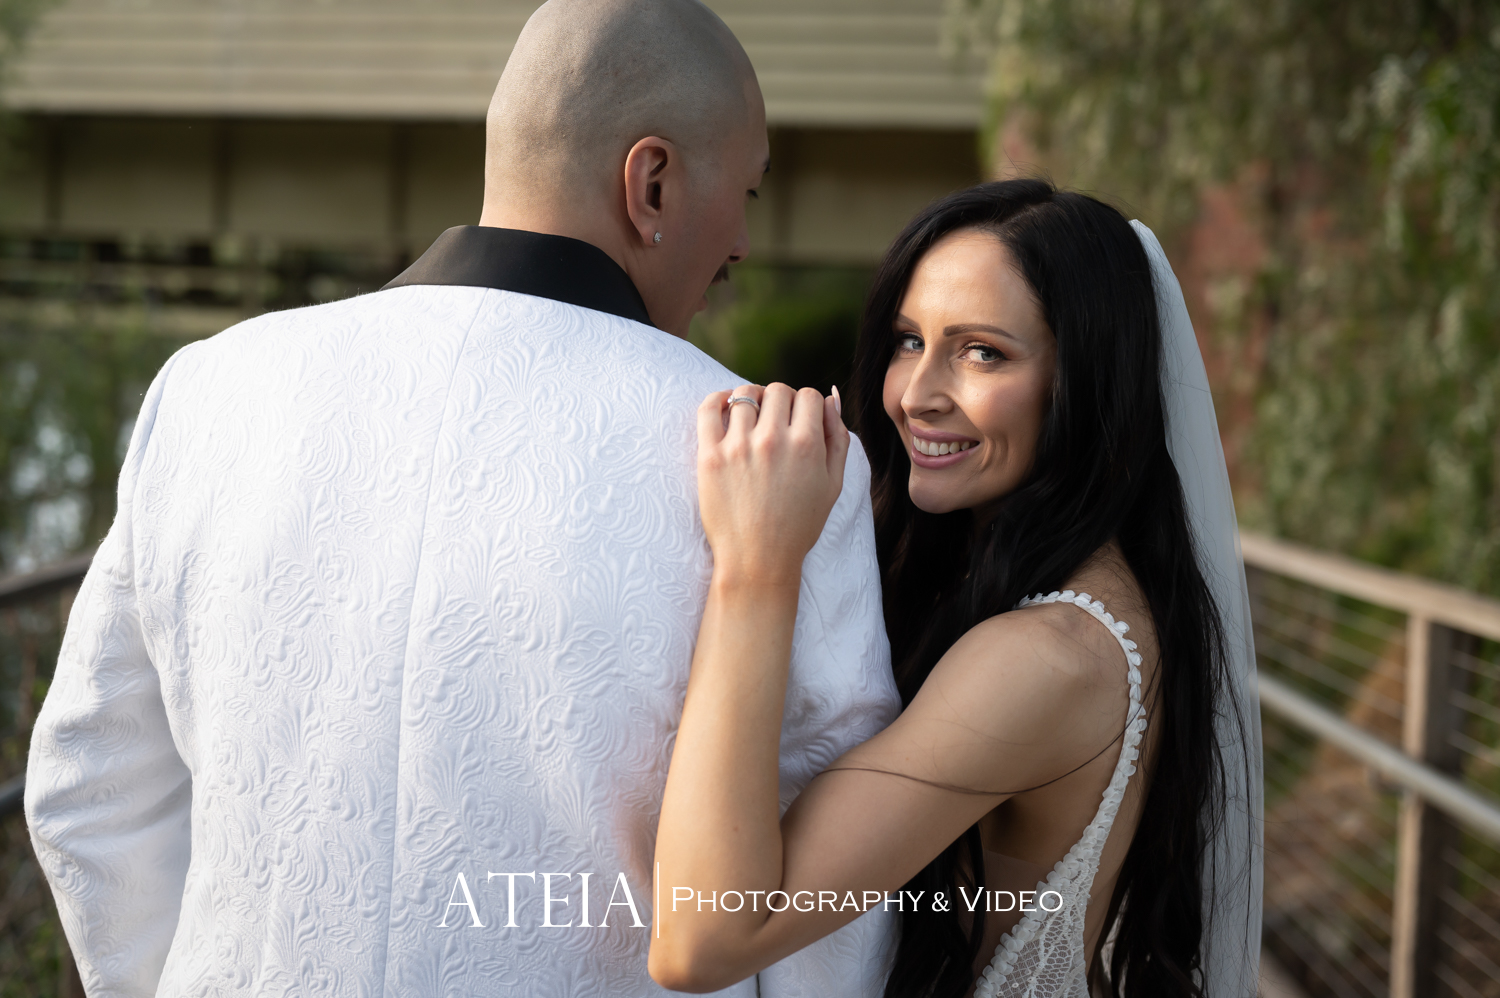 , Rachel and Jaydine’s wedding photography at Leonda by the Yarra captured by ATEIA Photography &#038; Video